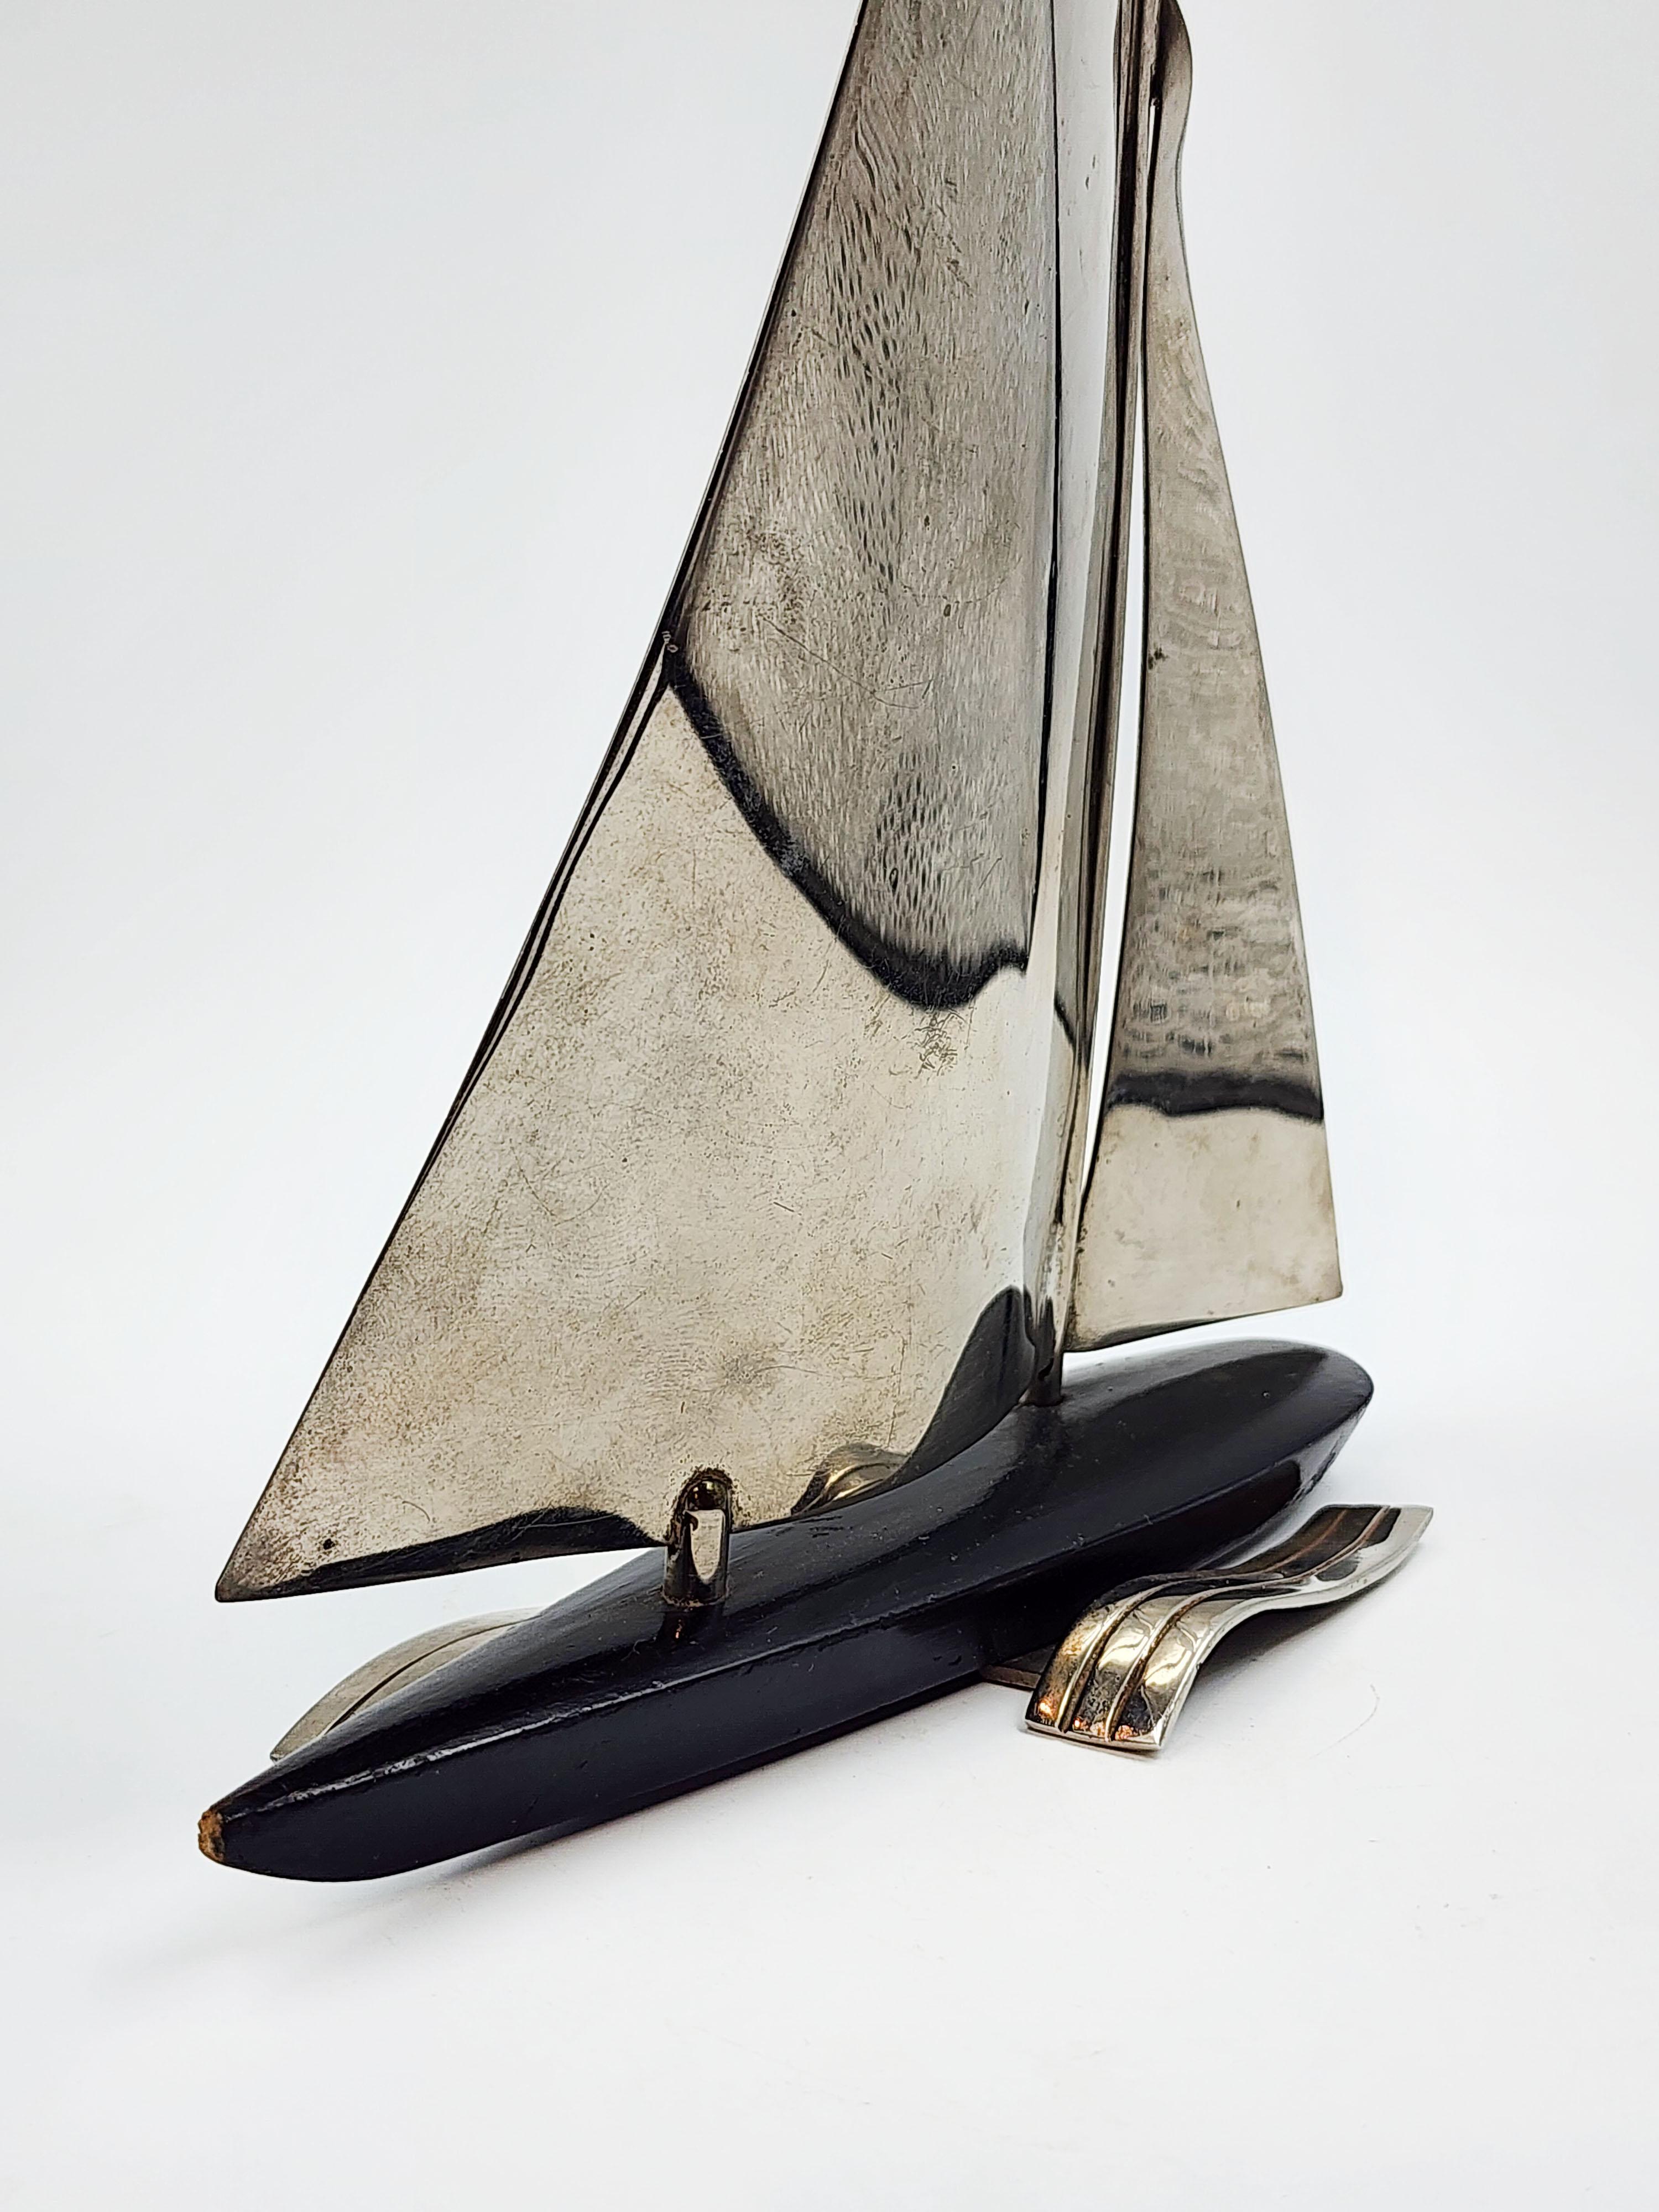 Hand-Crafted Art Deco Silver Metal Sailboat by Hagenauer For Sale